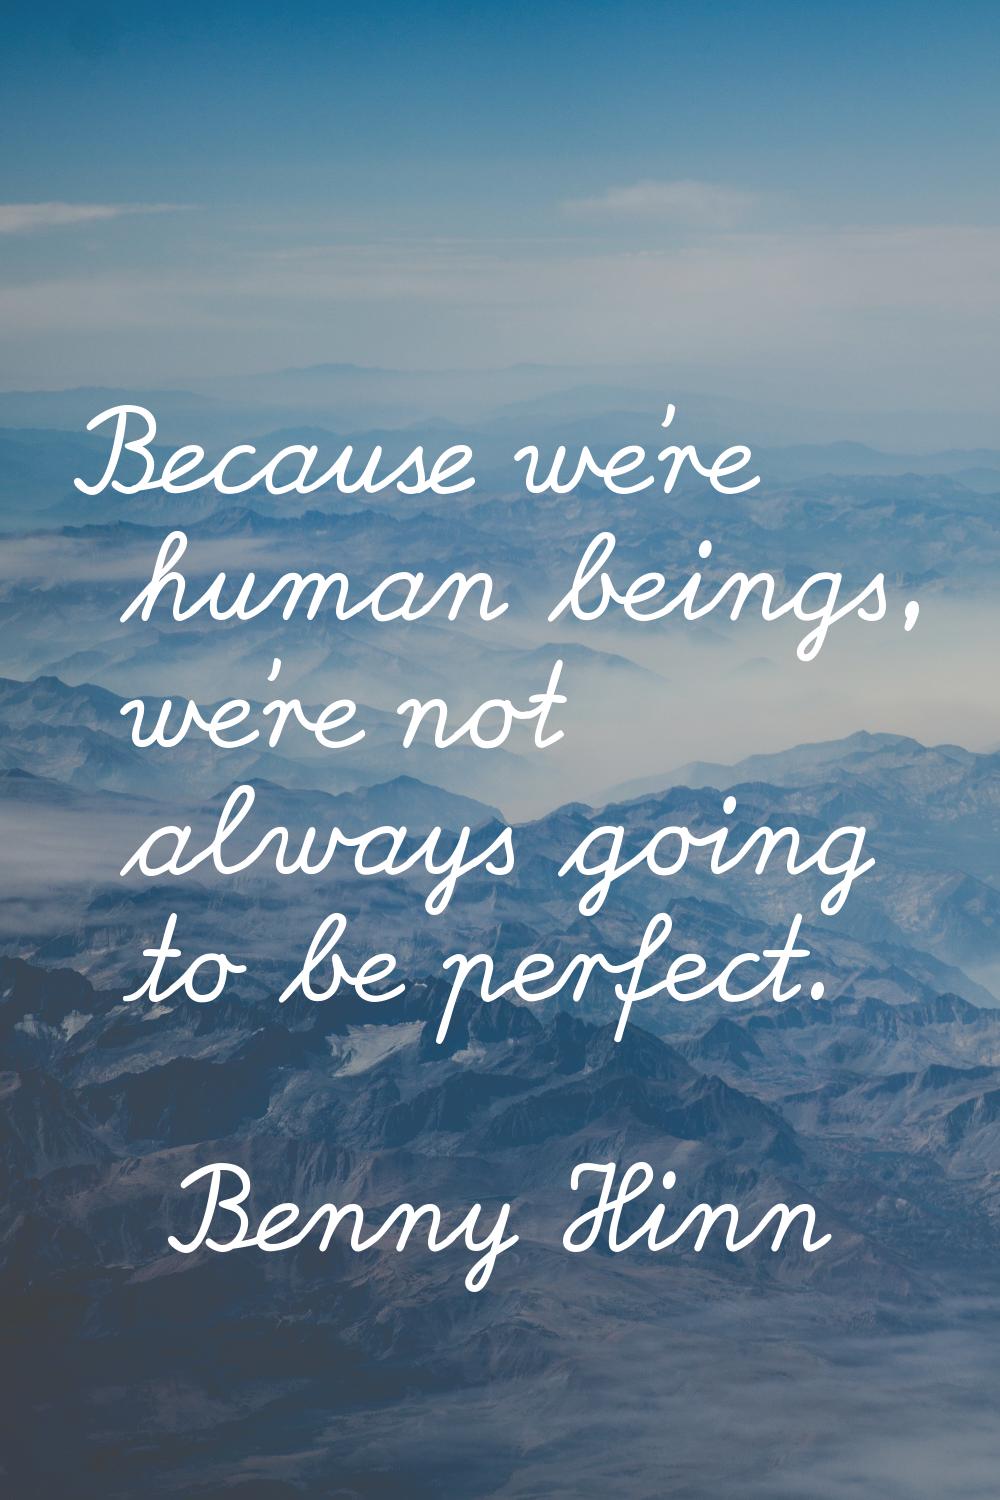 Because we're human beings, we're not always going to be perfect.